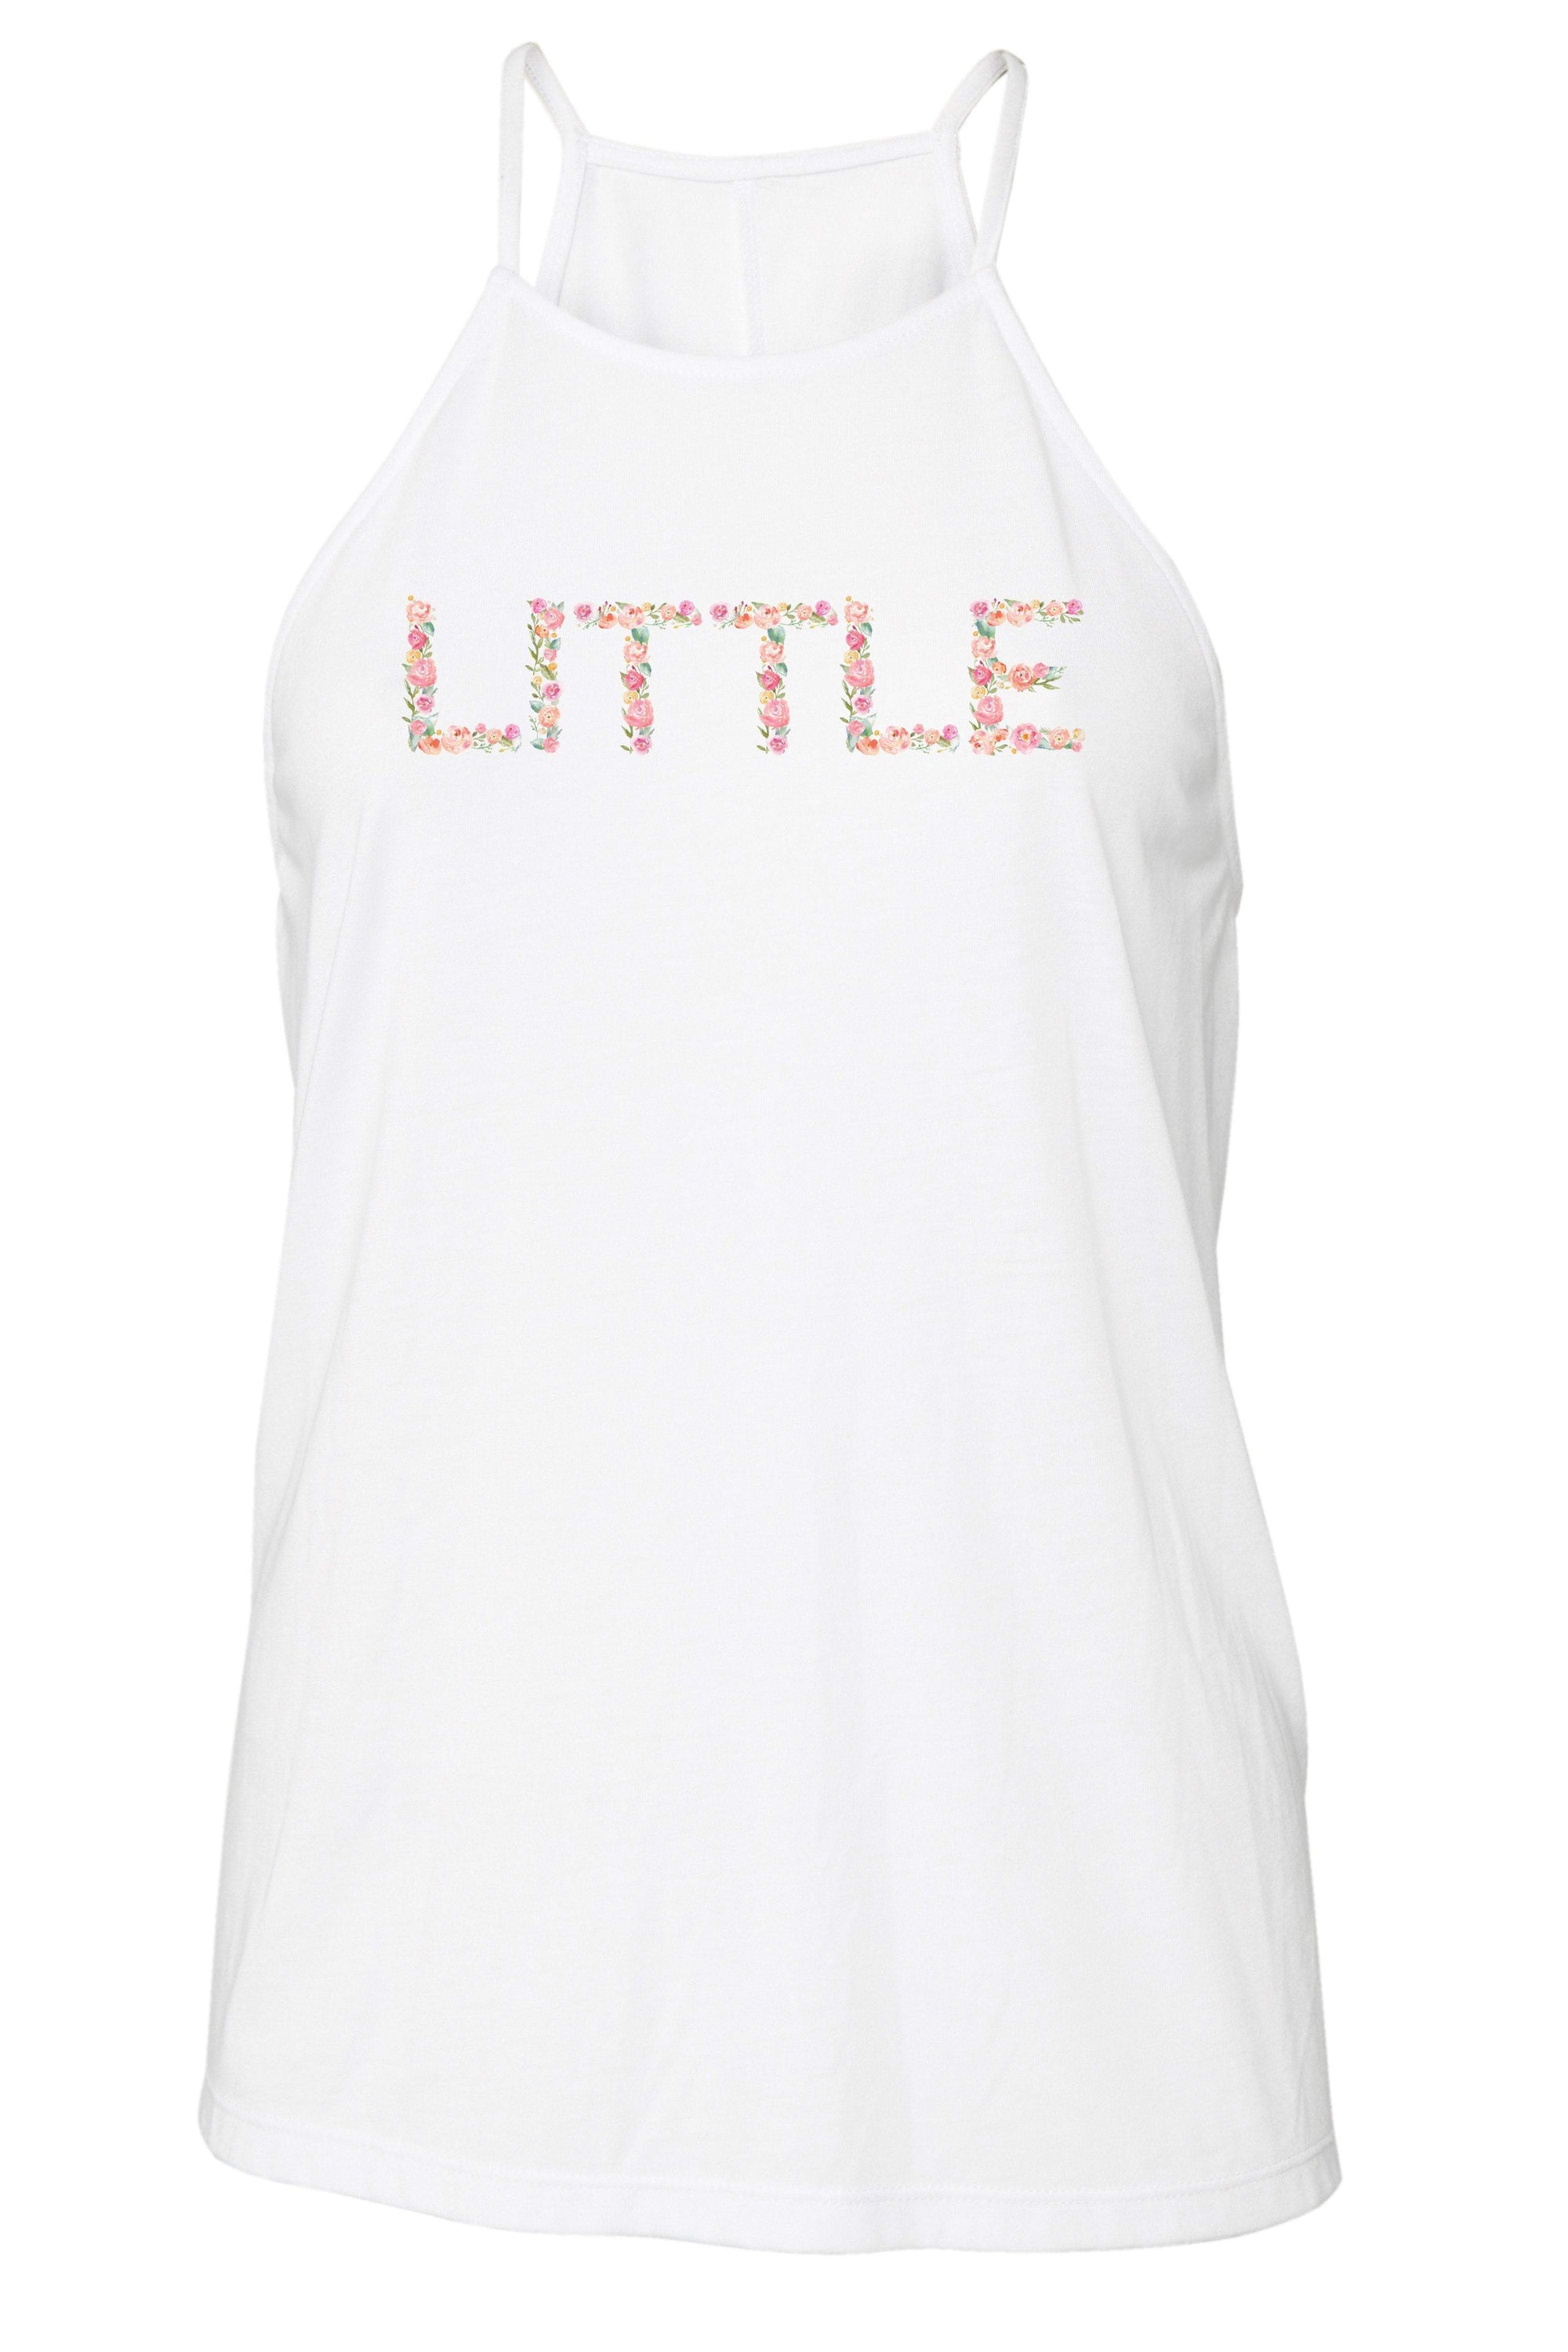 Big Little Floral Letters Tank - Bella Flowy High Neck, Ladies, Sunny and Southern, - Sunny and Southern,